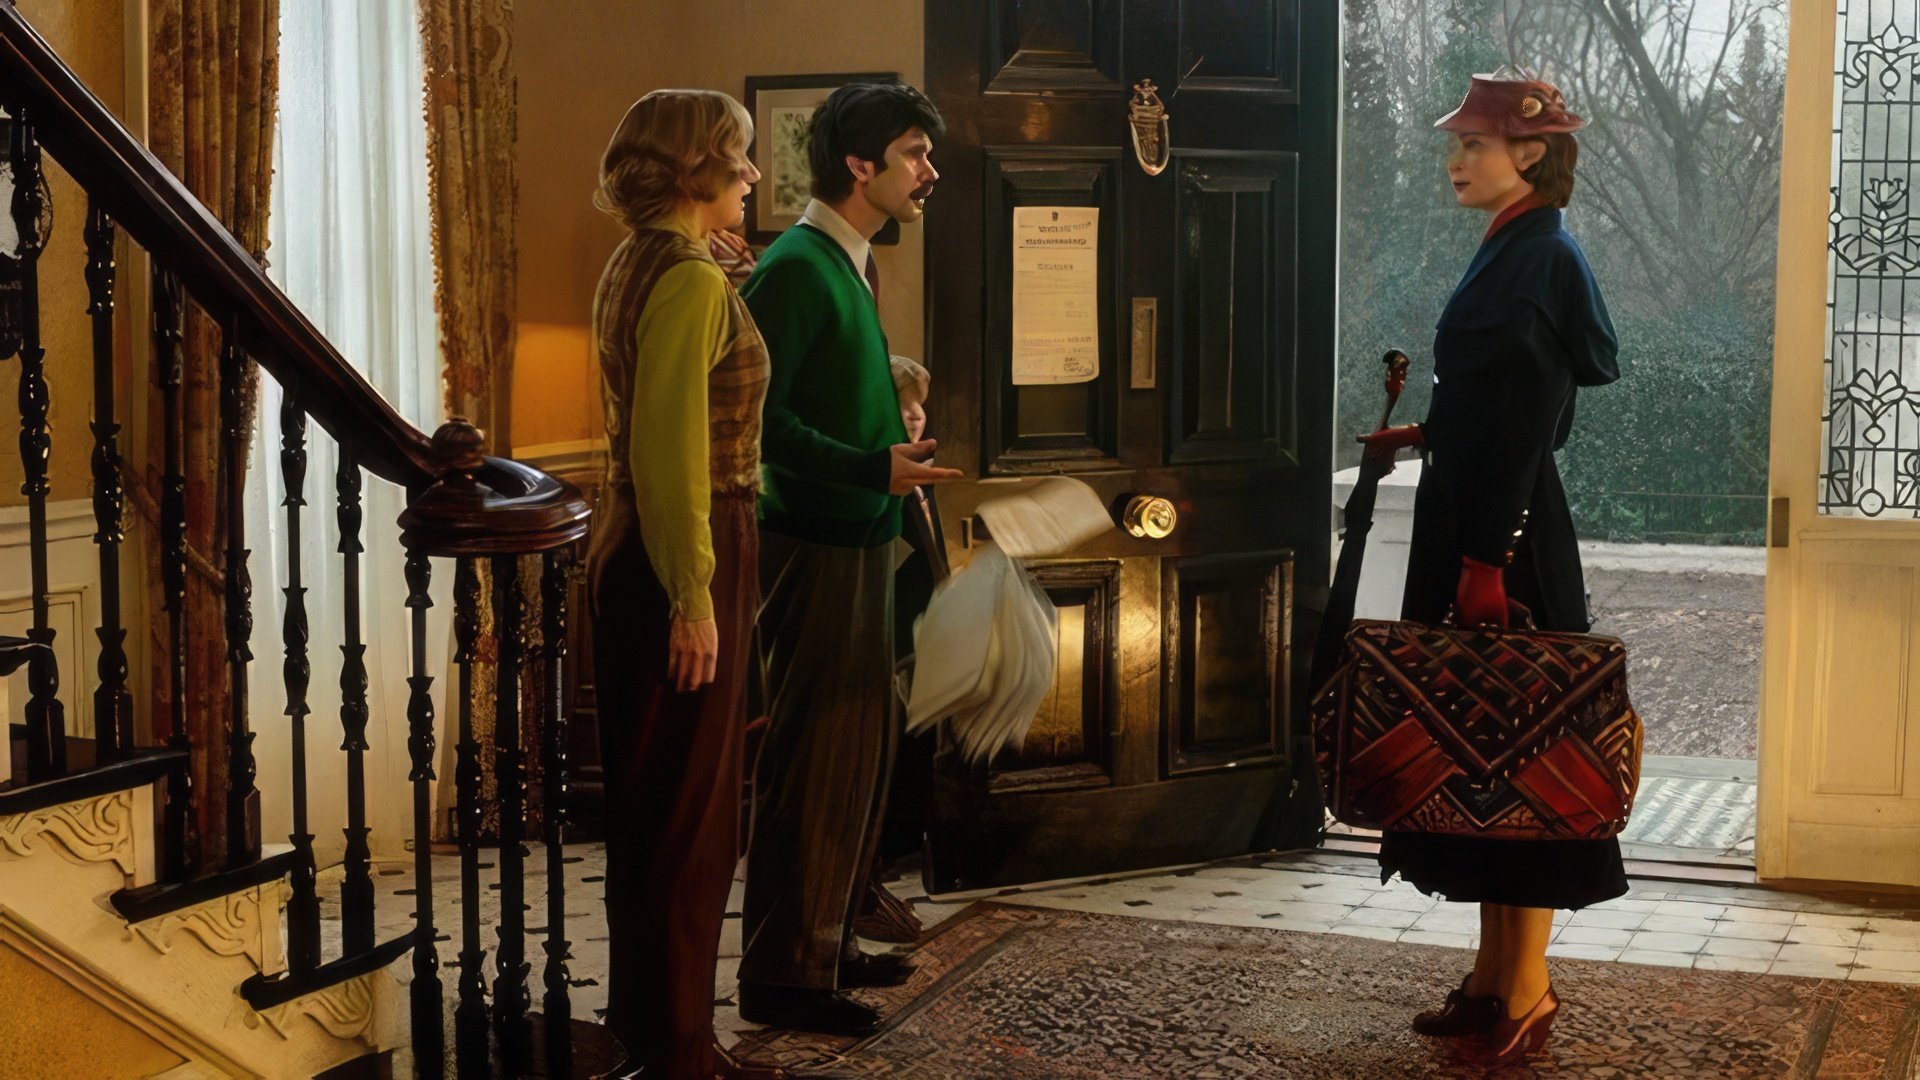  Scene from the film Mary Poppins Returns